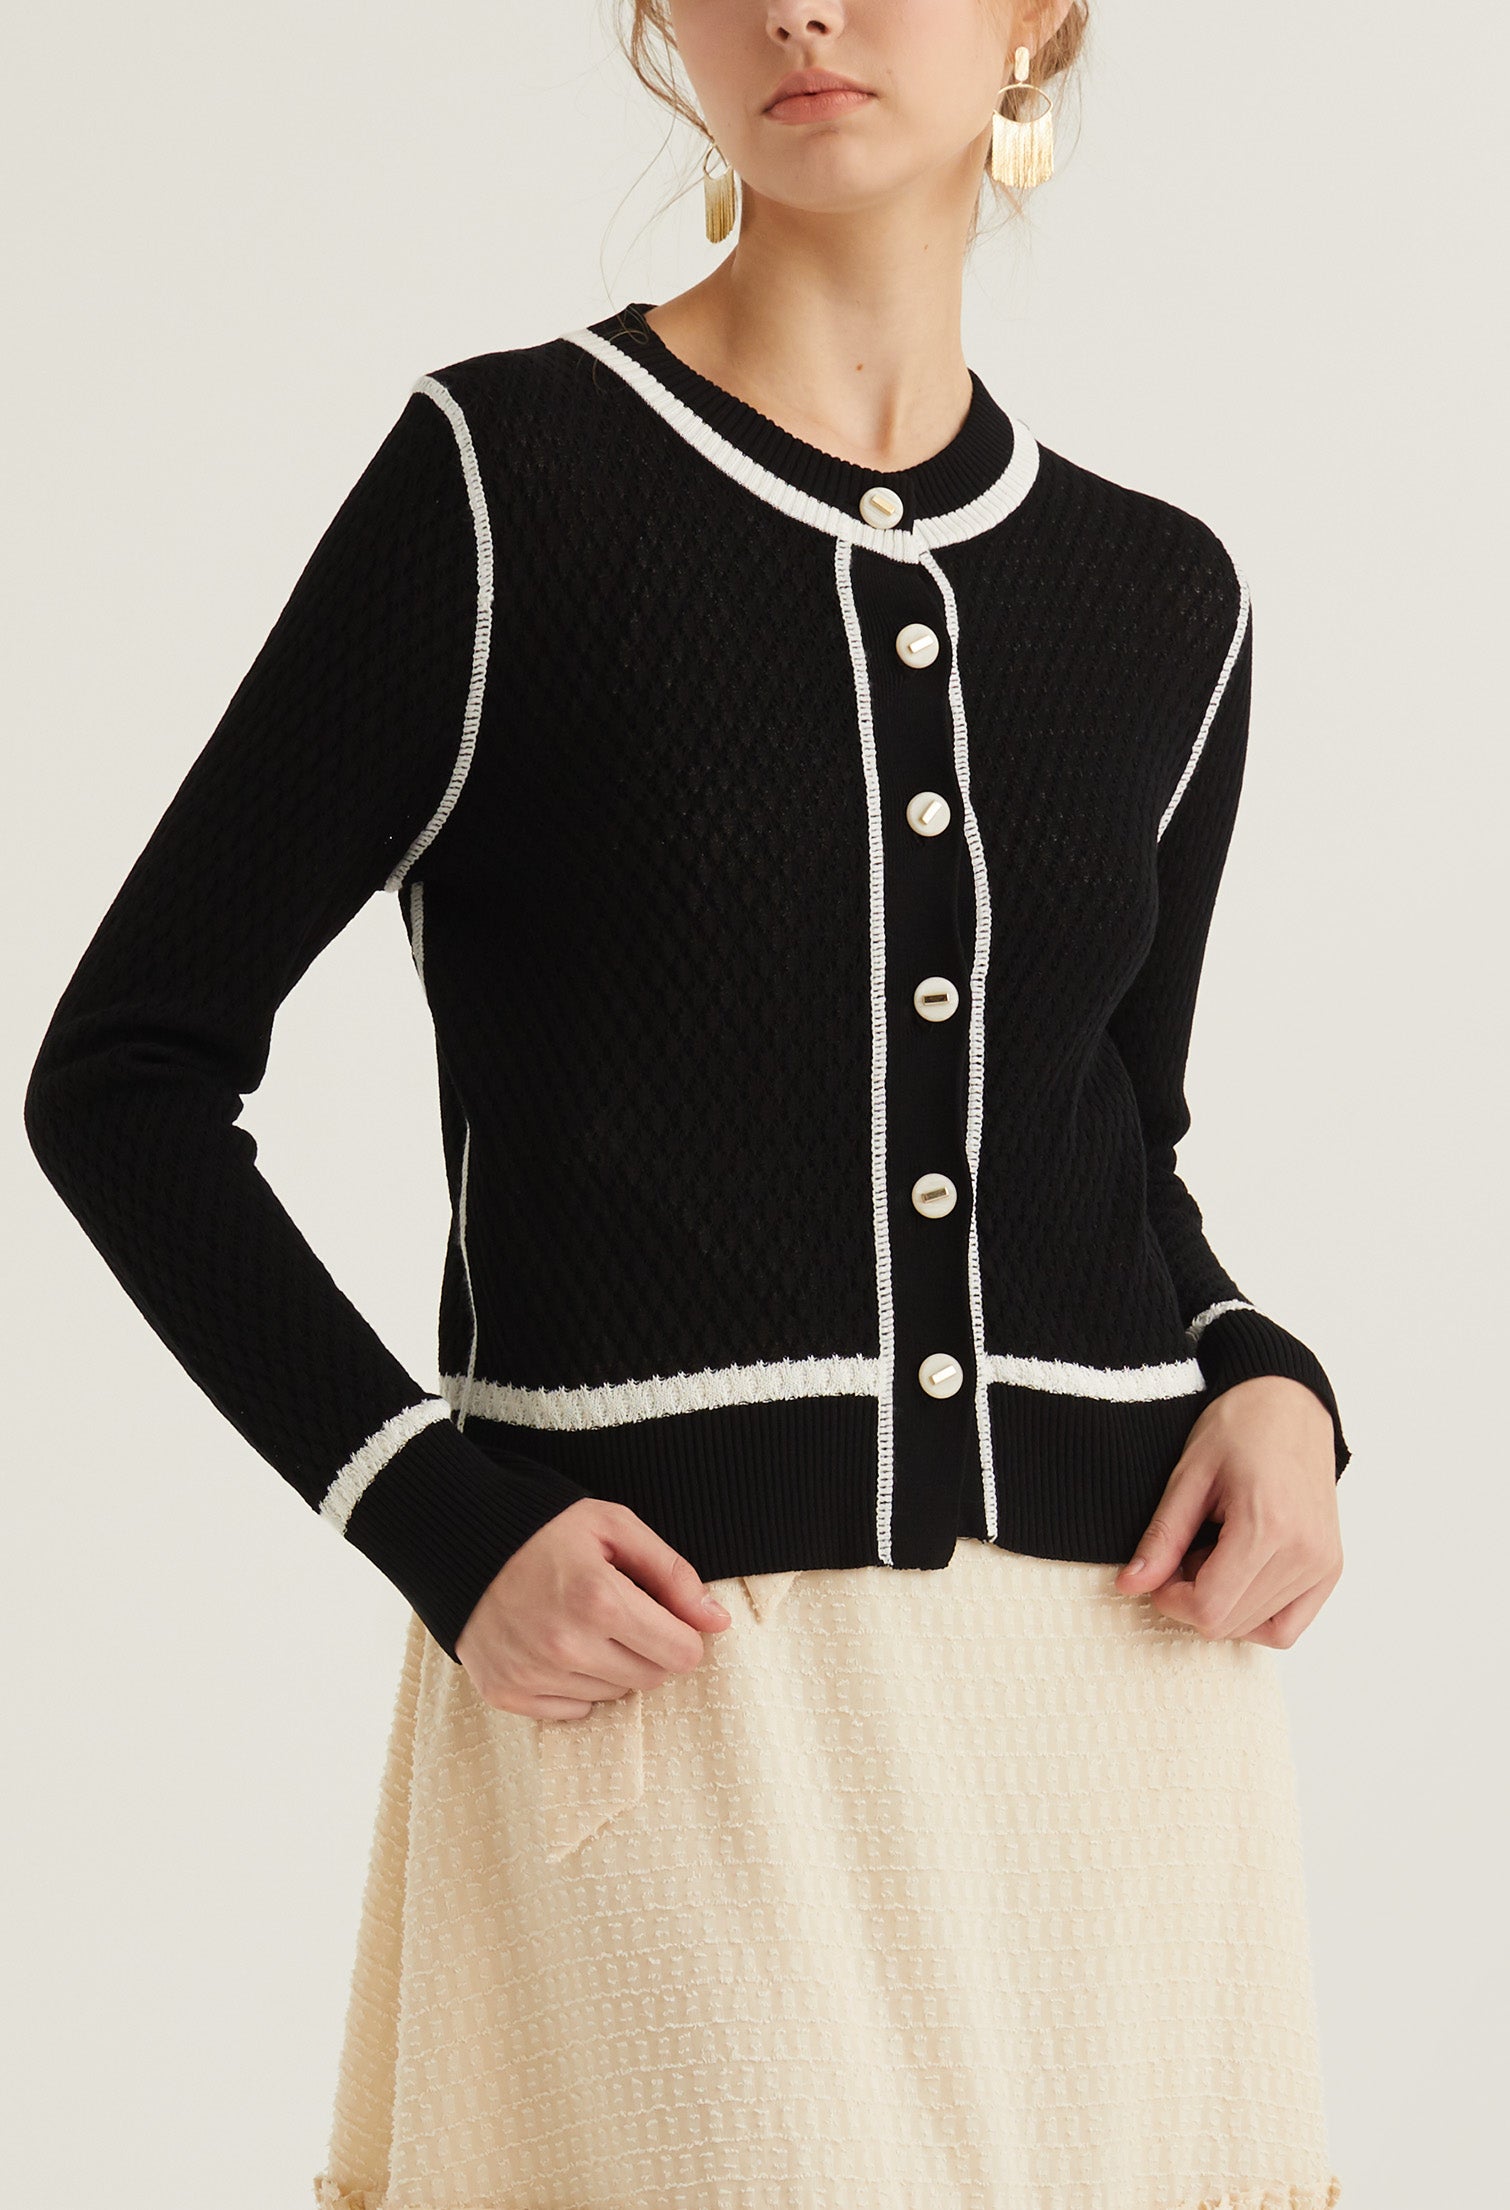 Contrast Detailed Cardigan